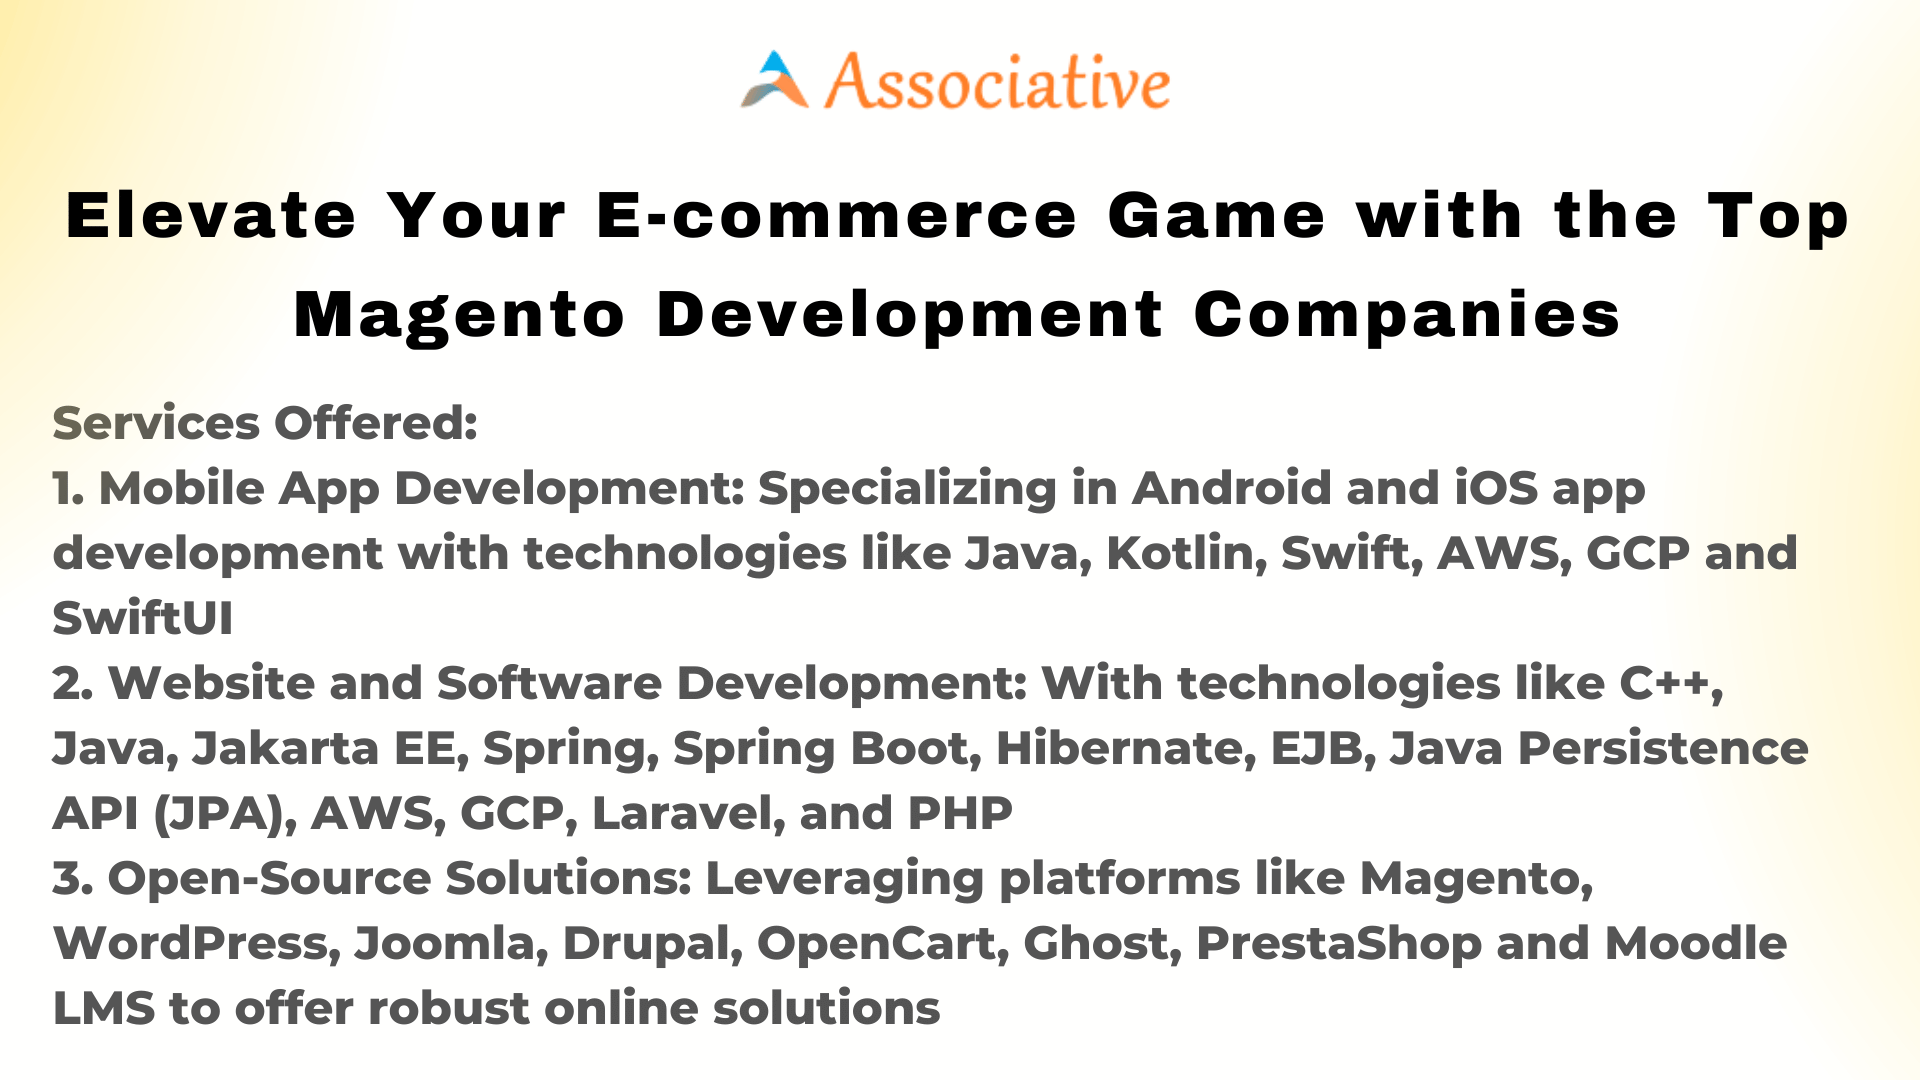 Elevate Your E-commerce Game with the Top Magento Development Companies